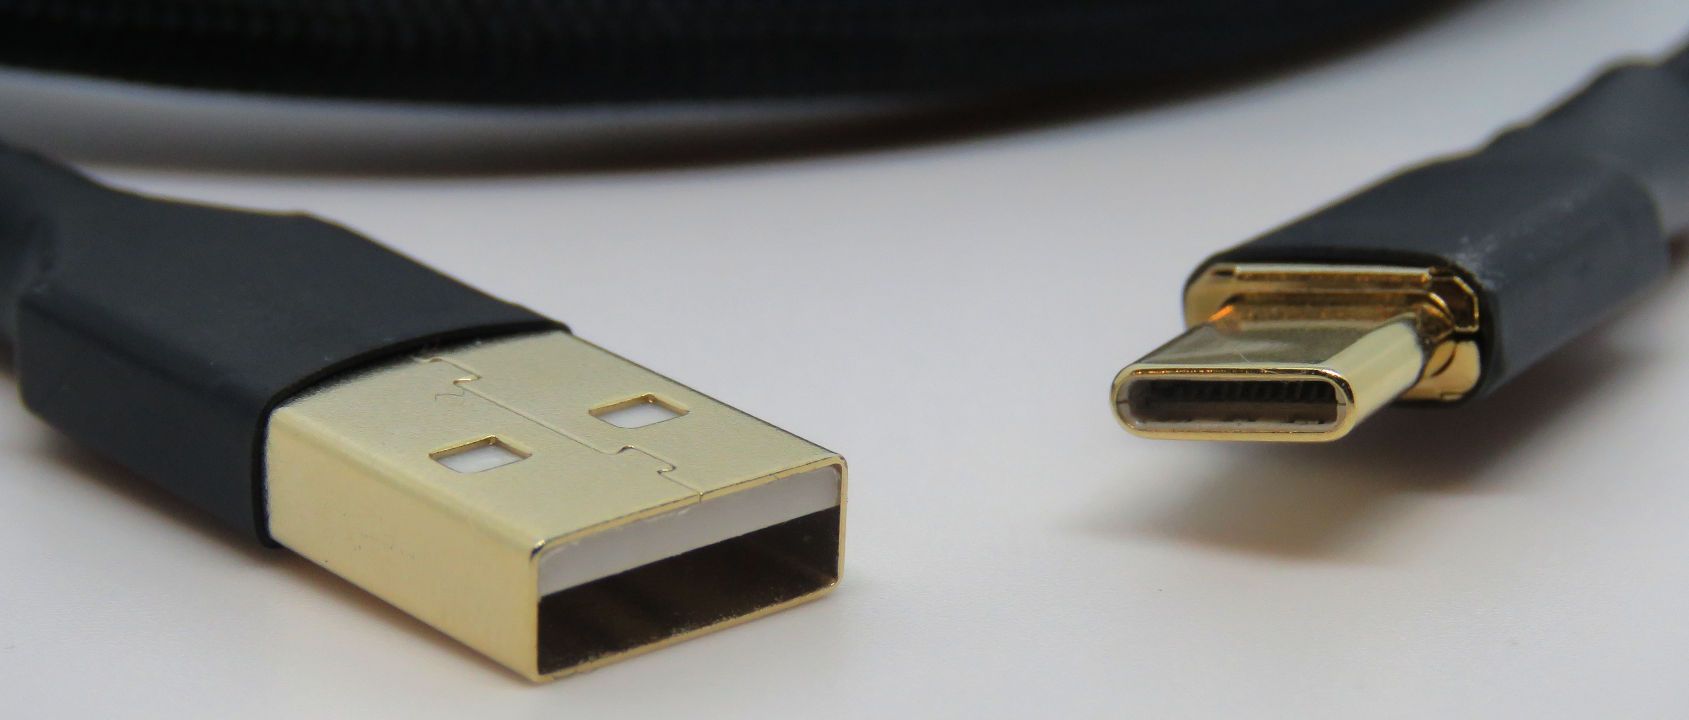 Reversible USB Type-C connector finalized: Devices, cables, and adapters  coming soon